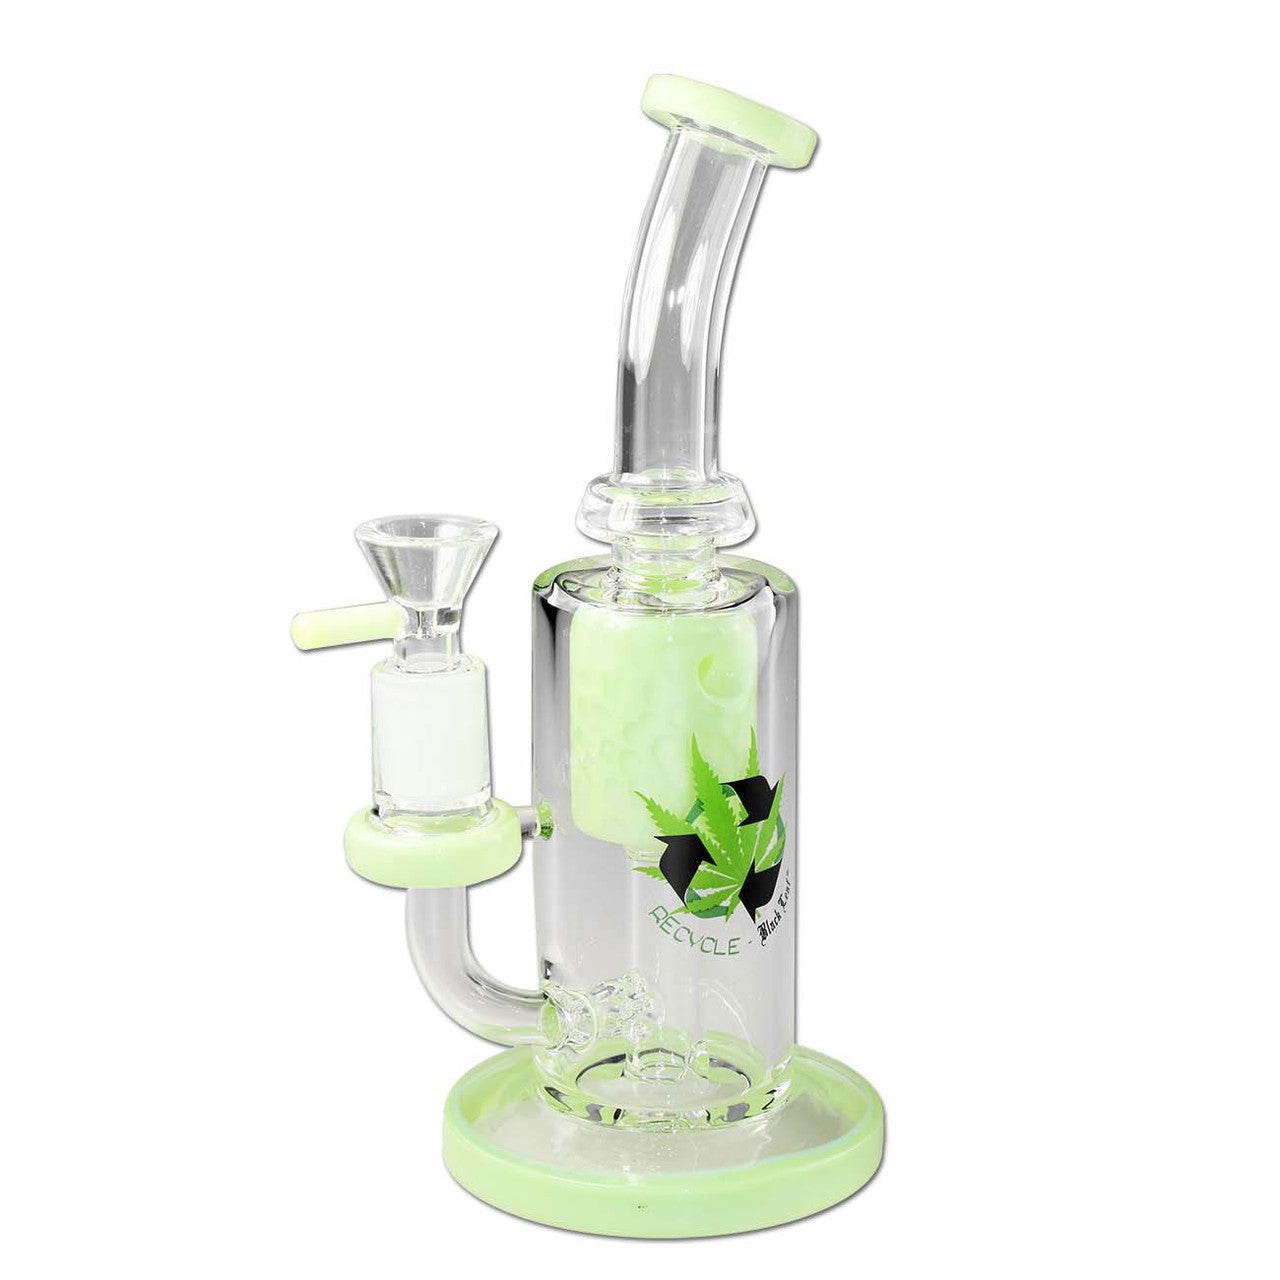 Black Leaf Recycle/Incycle Bubbler - Green.